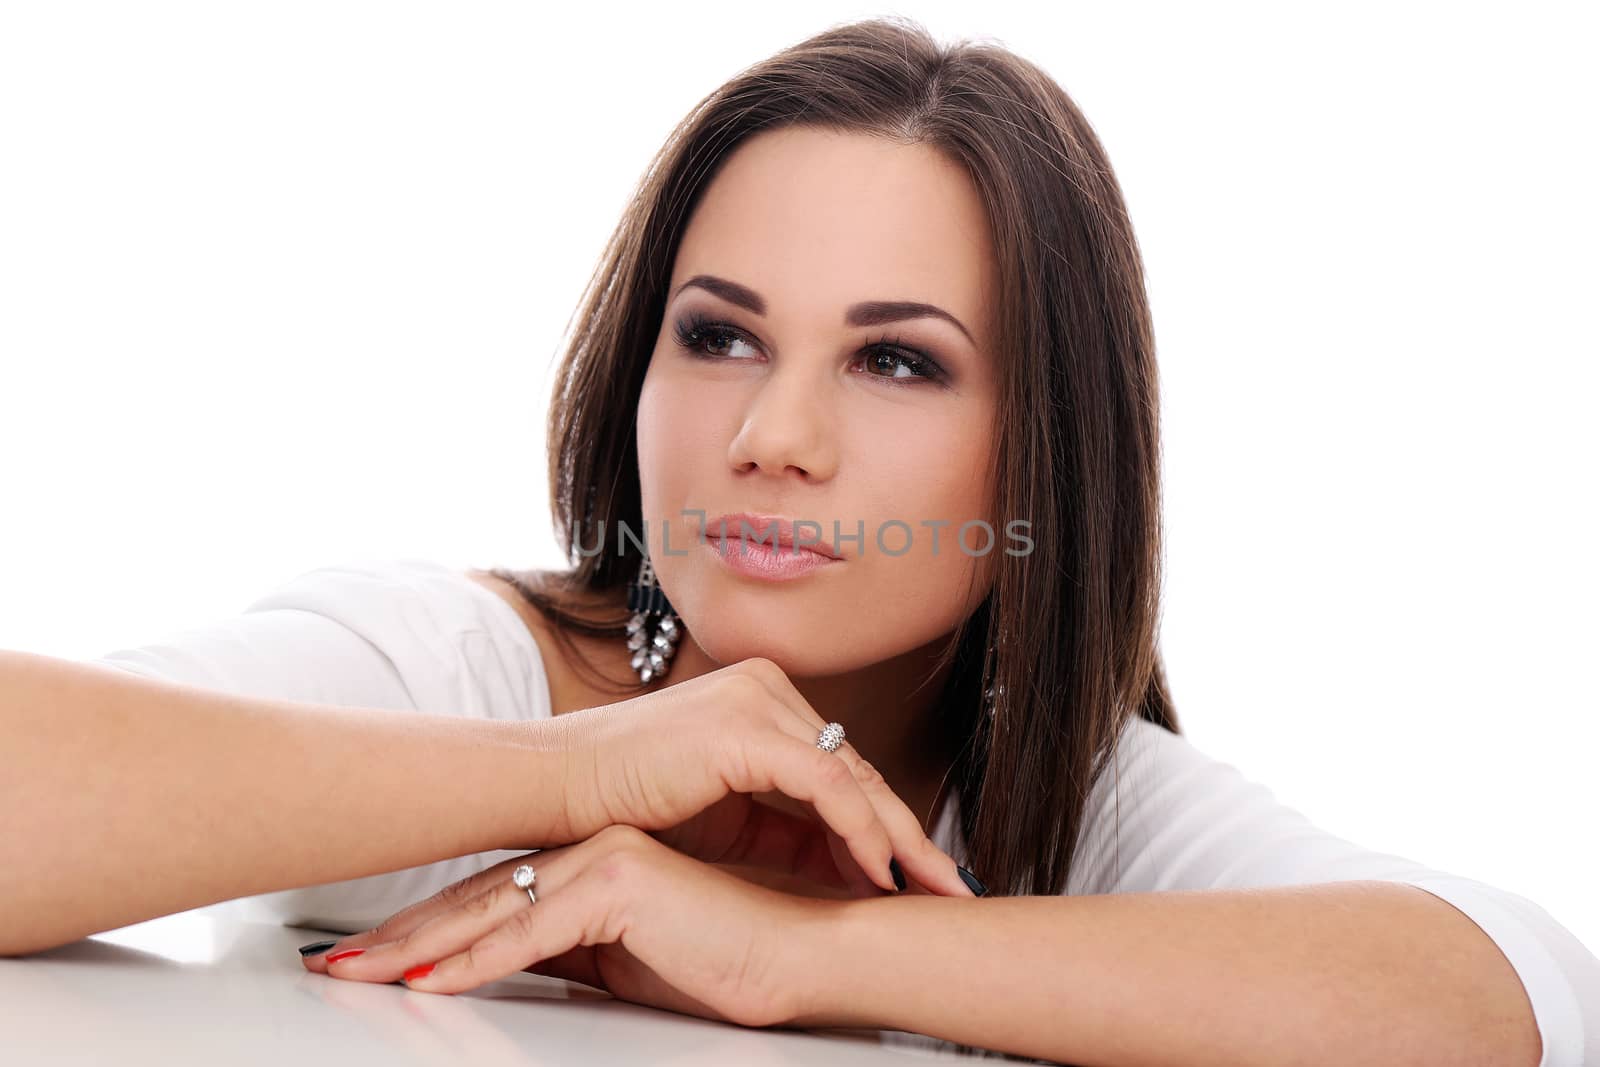 Portrait of a beautiful brown-haired girl who is posing over a white background